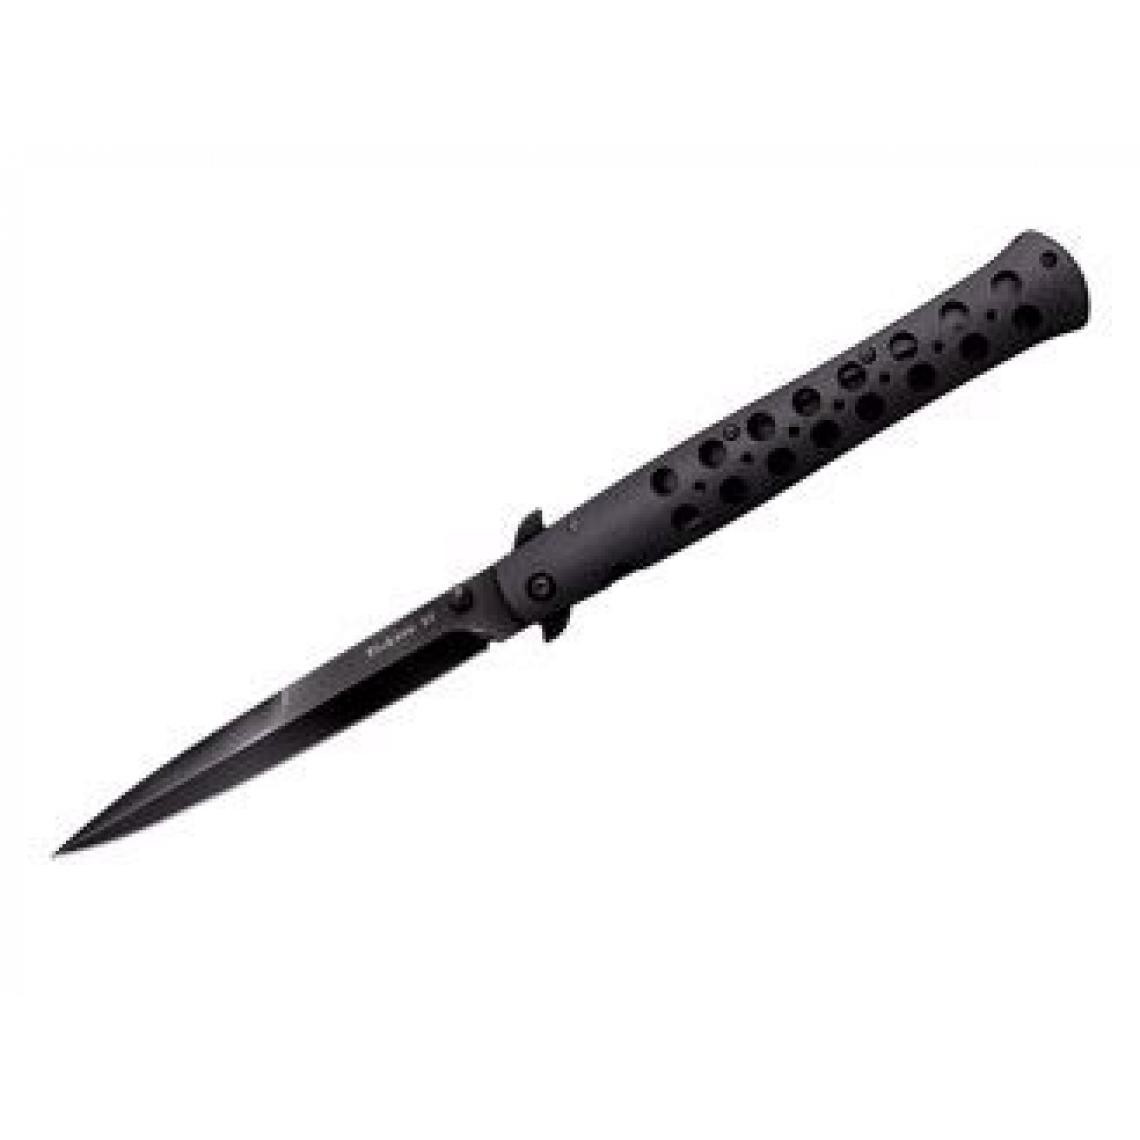 Divers Marques - Cold Steel TI-LITE 6" G-10 S35VN STEEL 26C6 - Outils de coupe